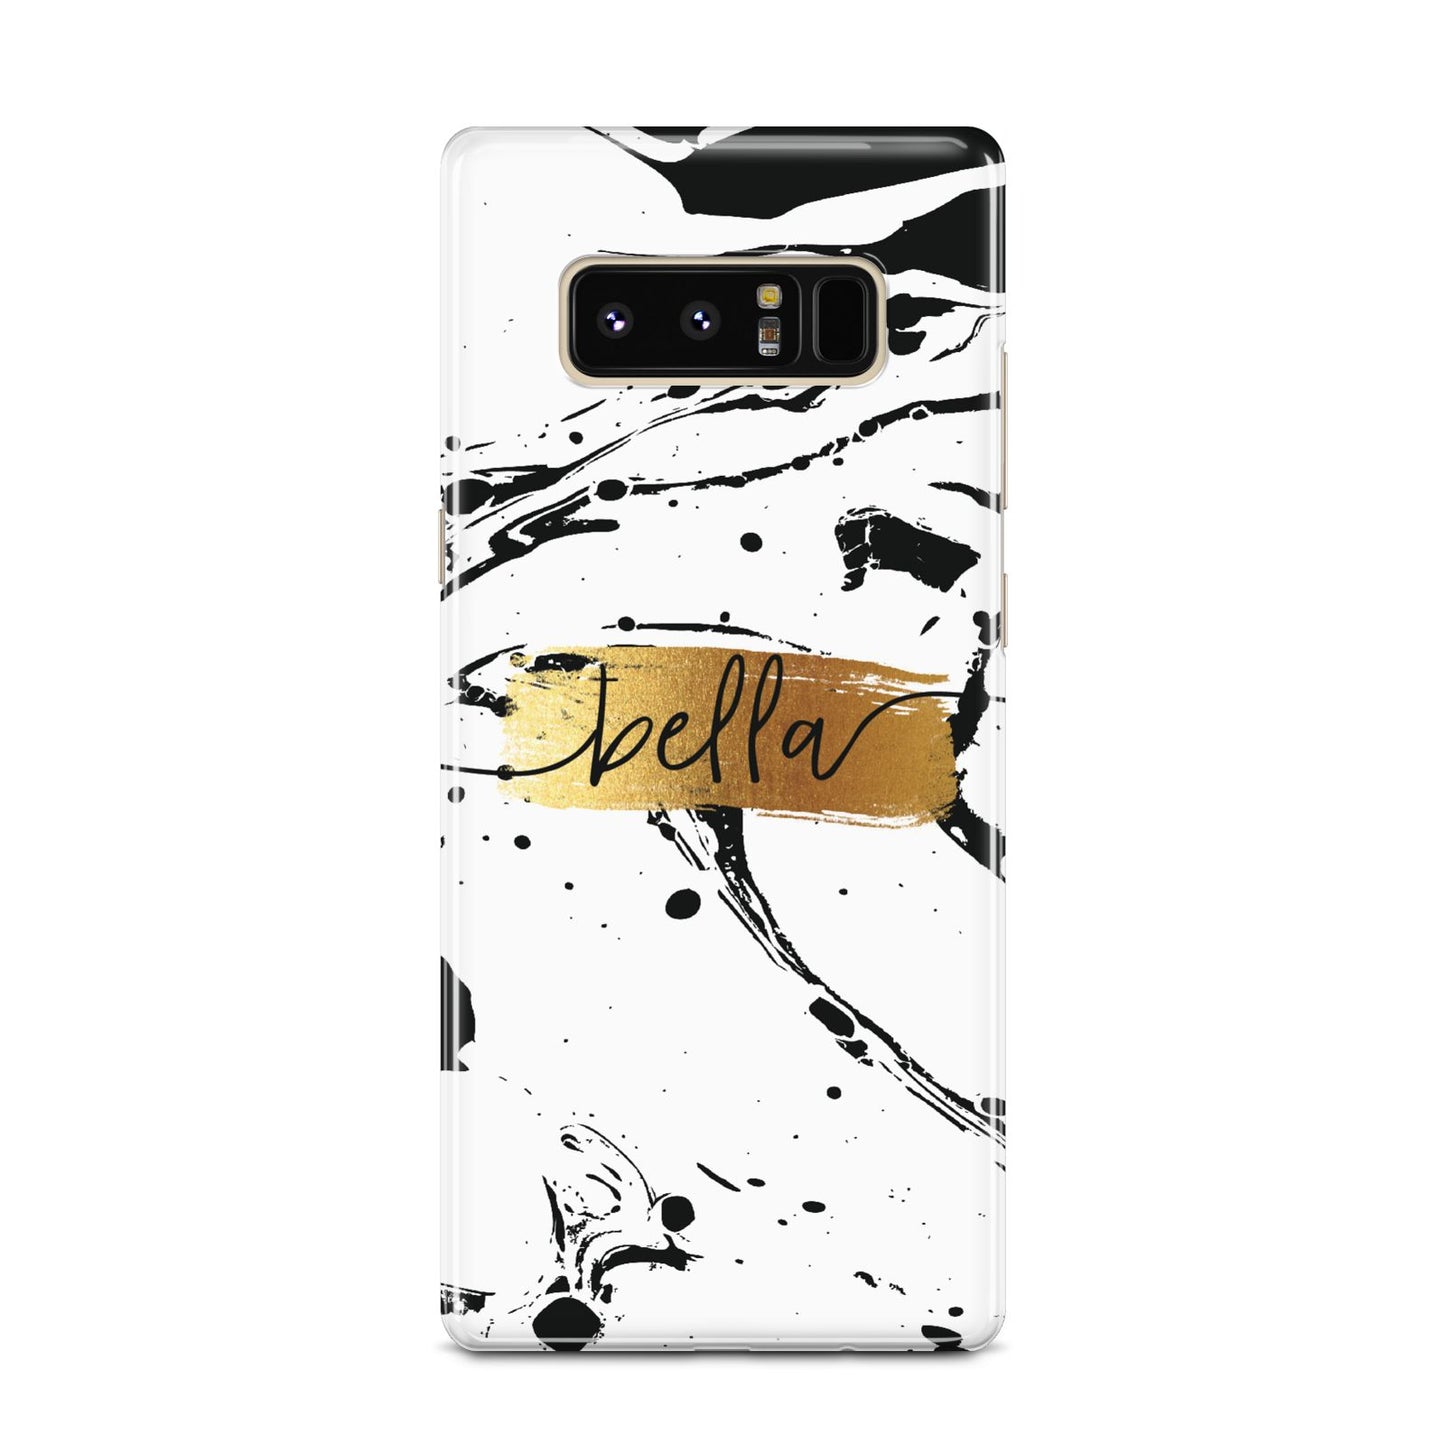 Personalised White Gold Swirl Marble Samsung Galaxy Note 8 Case